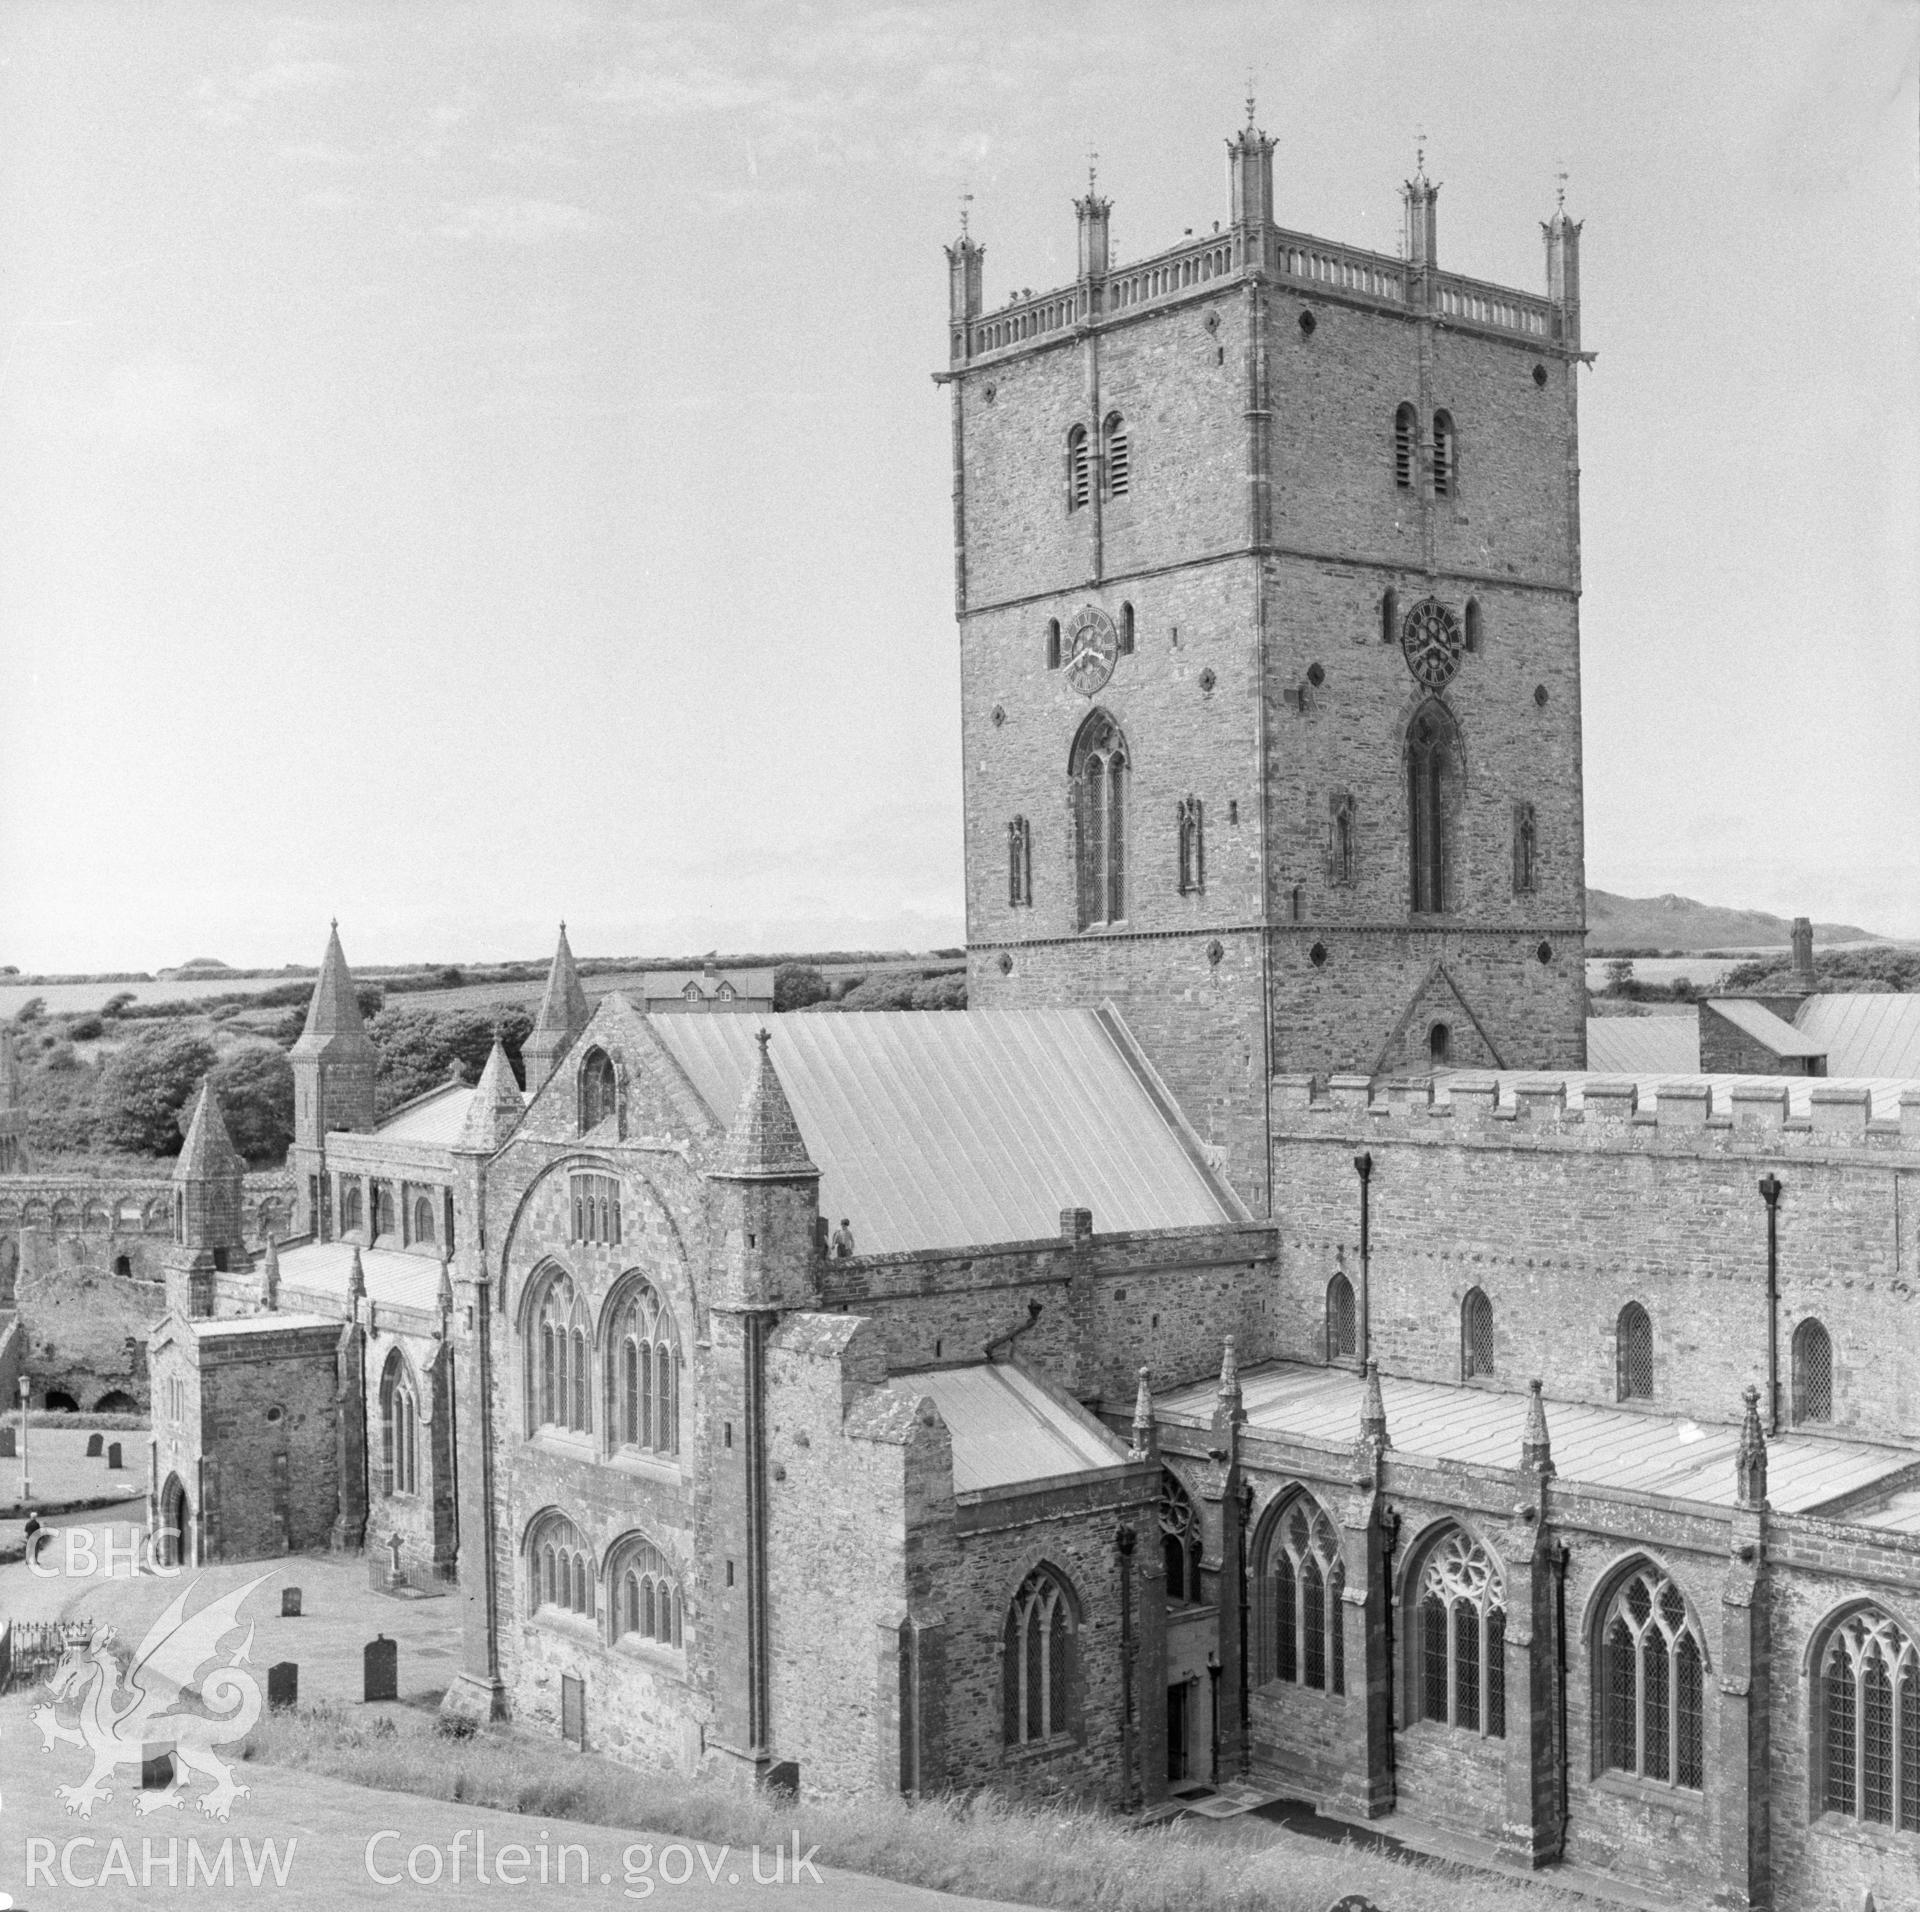 Digital copy of an acetate negative showing St David's Cathedral, 15th September 1967.